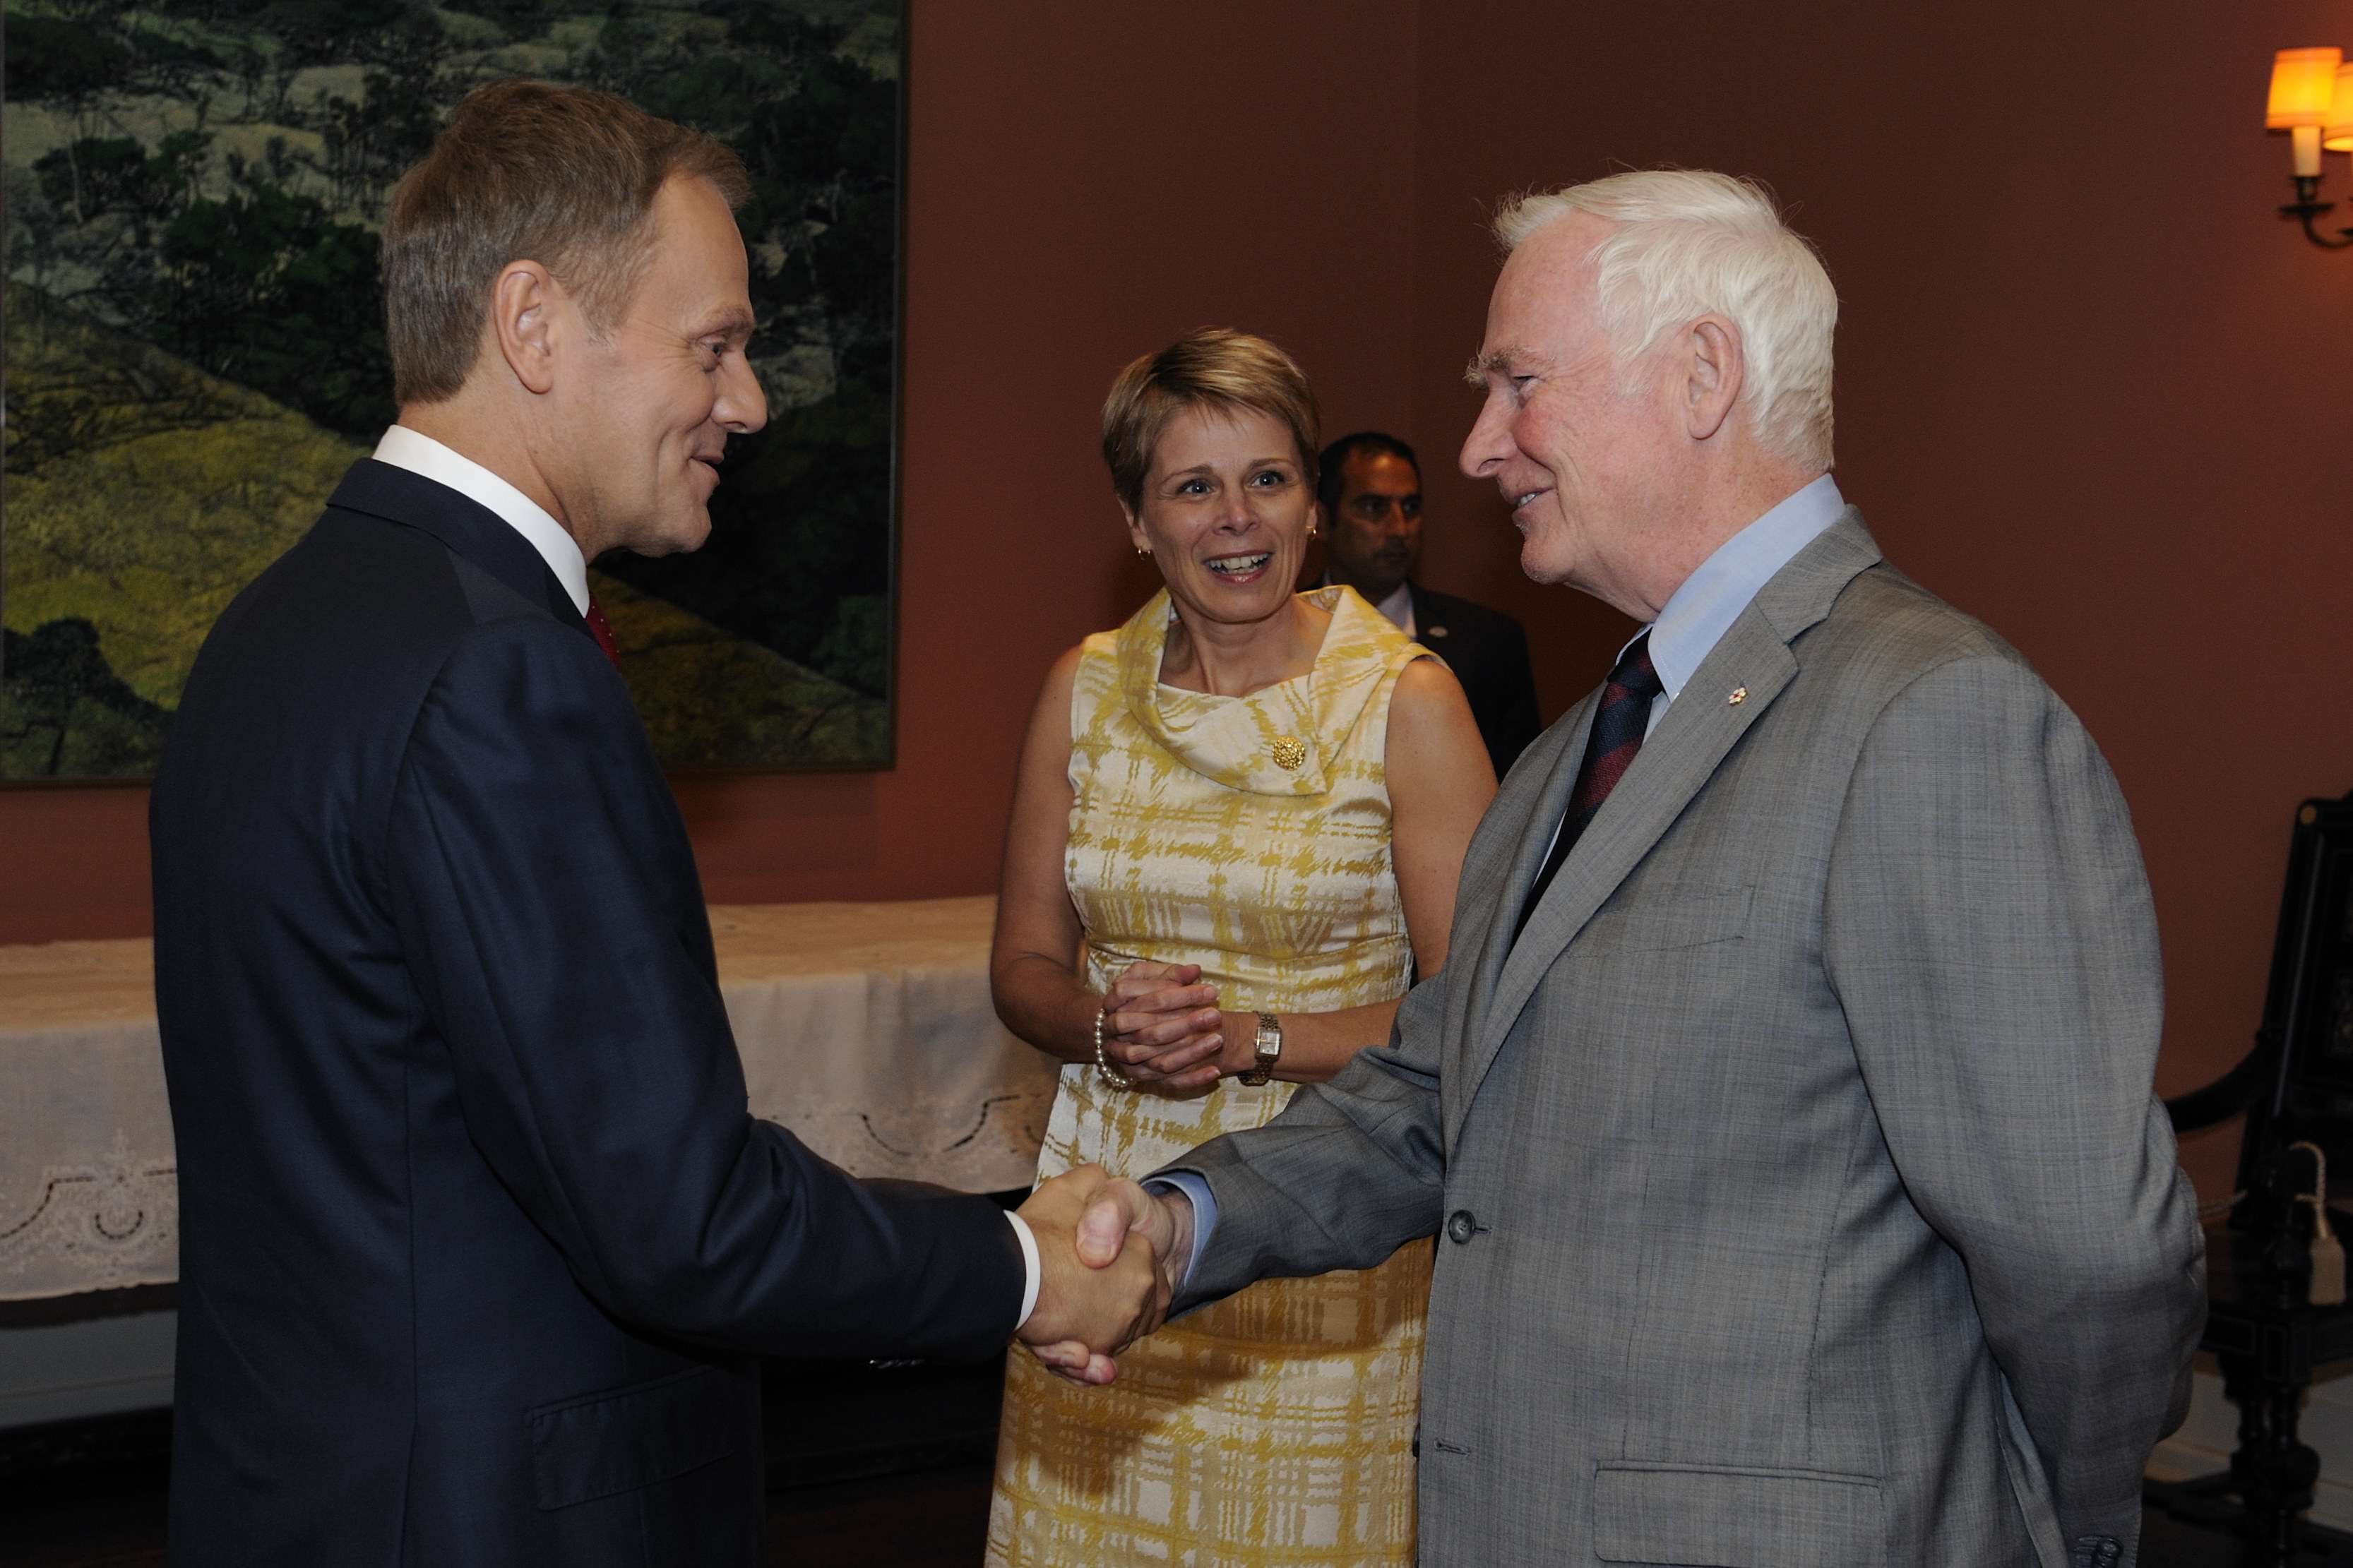 His Excellency the Right Honourable David Johnston, Governor General of Canada, met with His Excellency Donald Tusk, Prime Minister of the Republic of Poland, at Rideau Hall, on May 14, 2012.